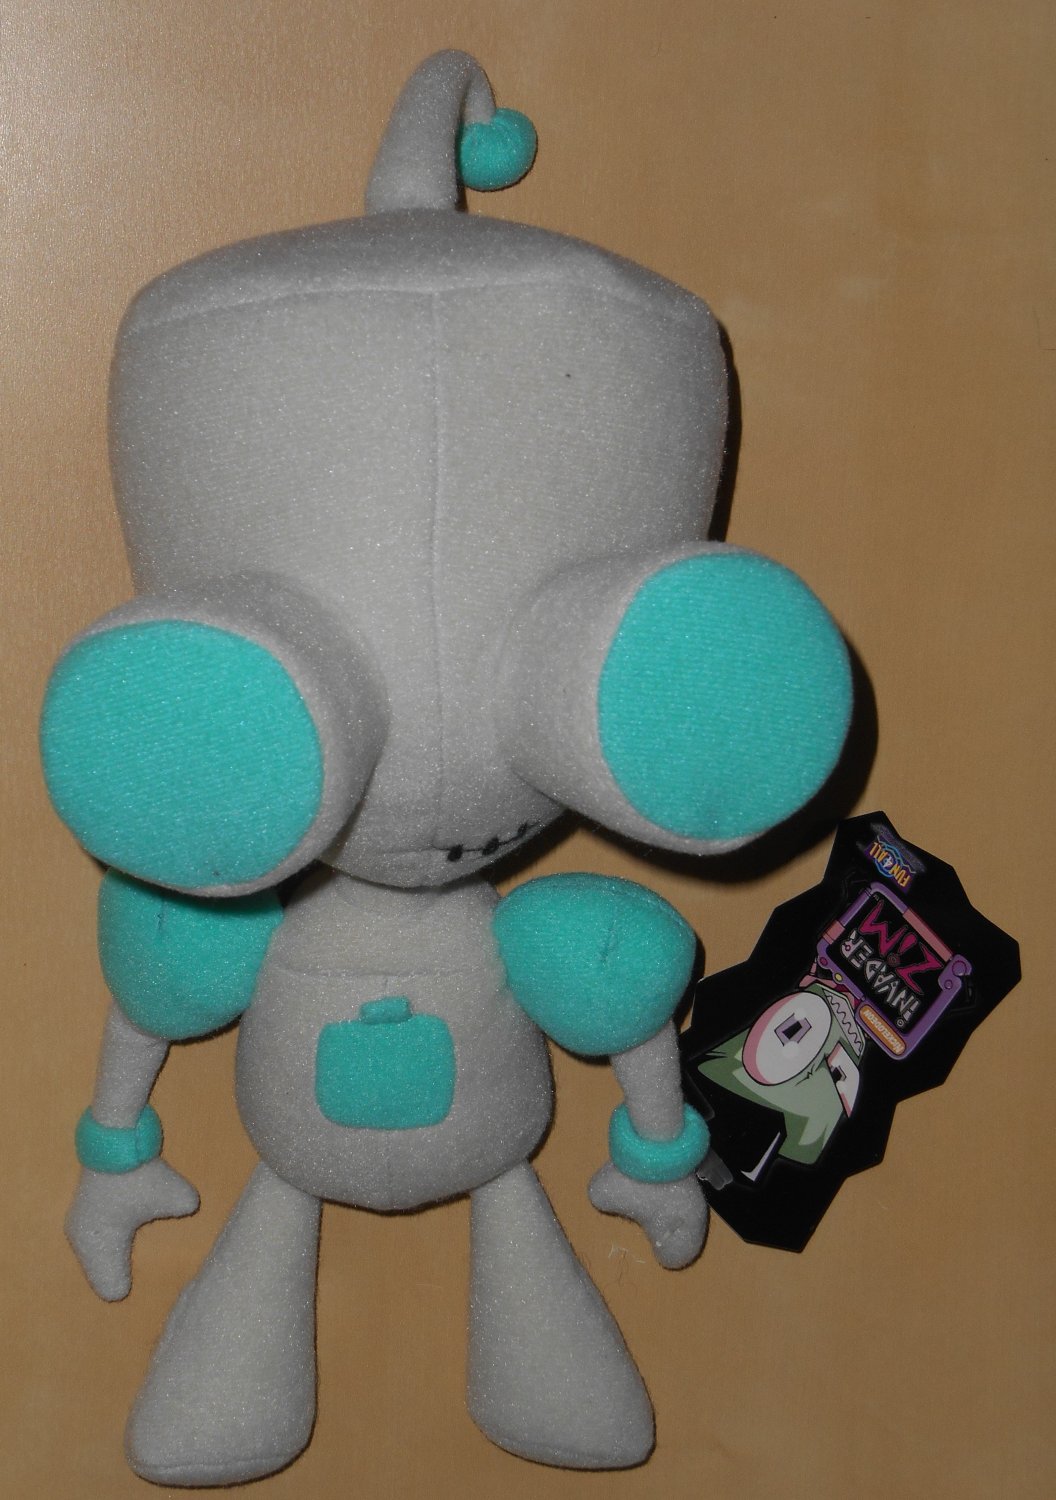 Invader Zim Plush Good Robot Gir 9 Inch Doll Toy 2002 Viacom With Tag